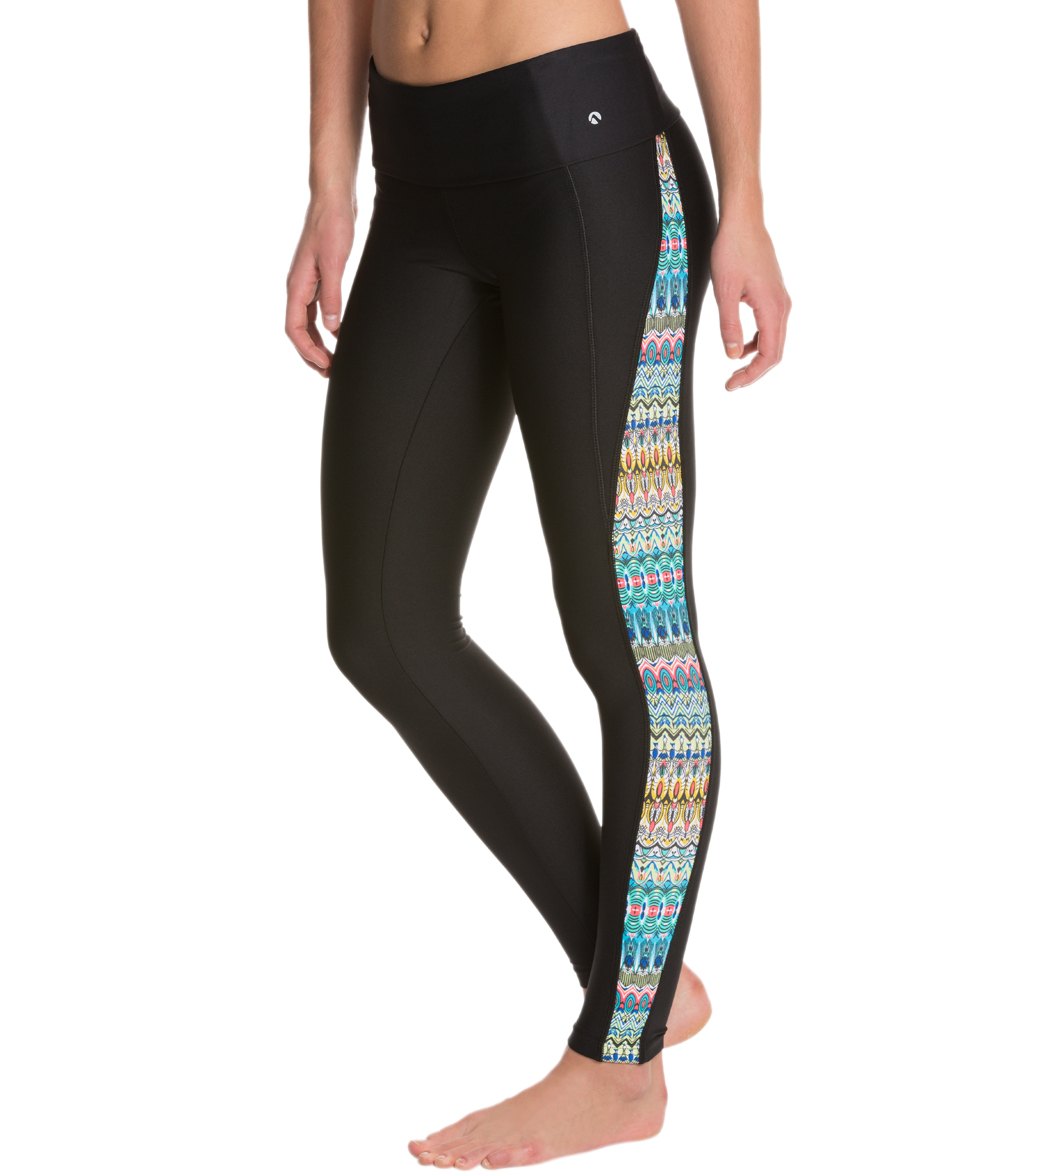 Next Soul Energy Malibu Surf Tight at SwimOutlet.com - Free Shipping